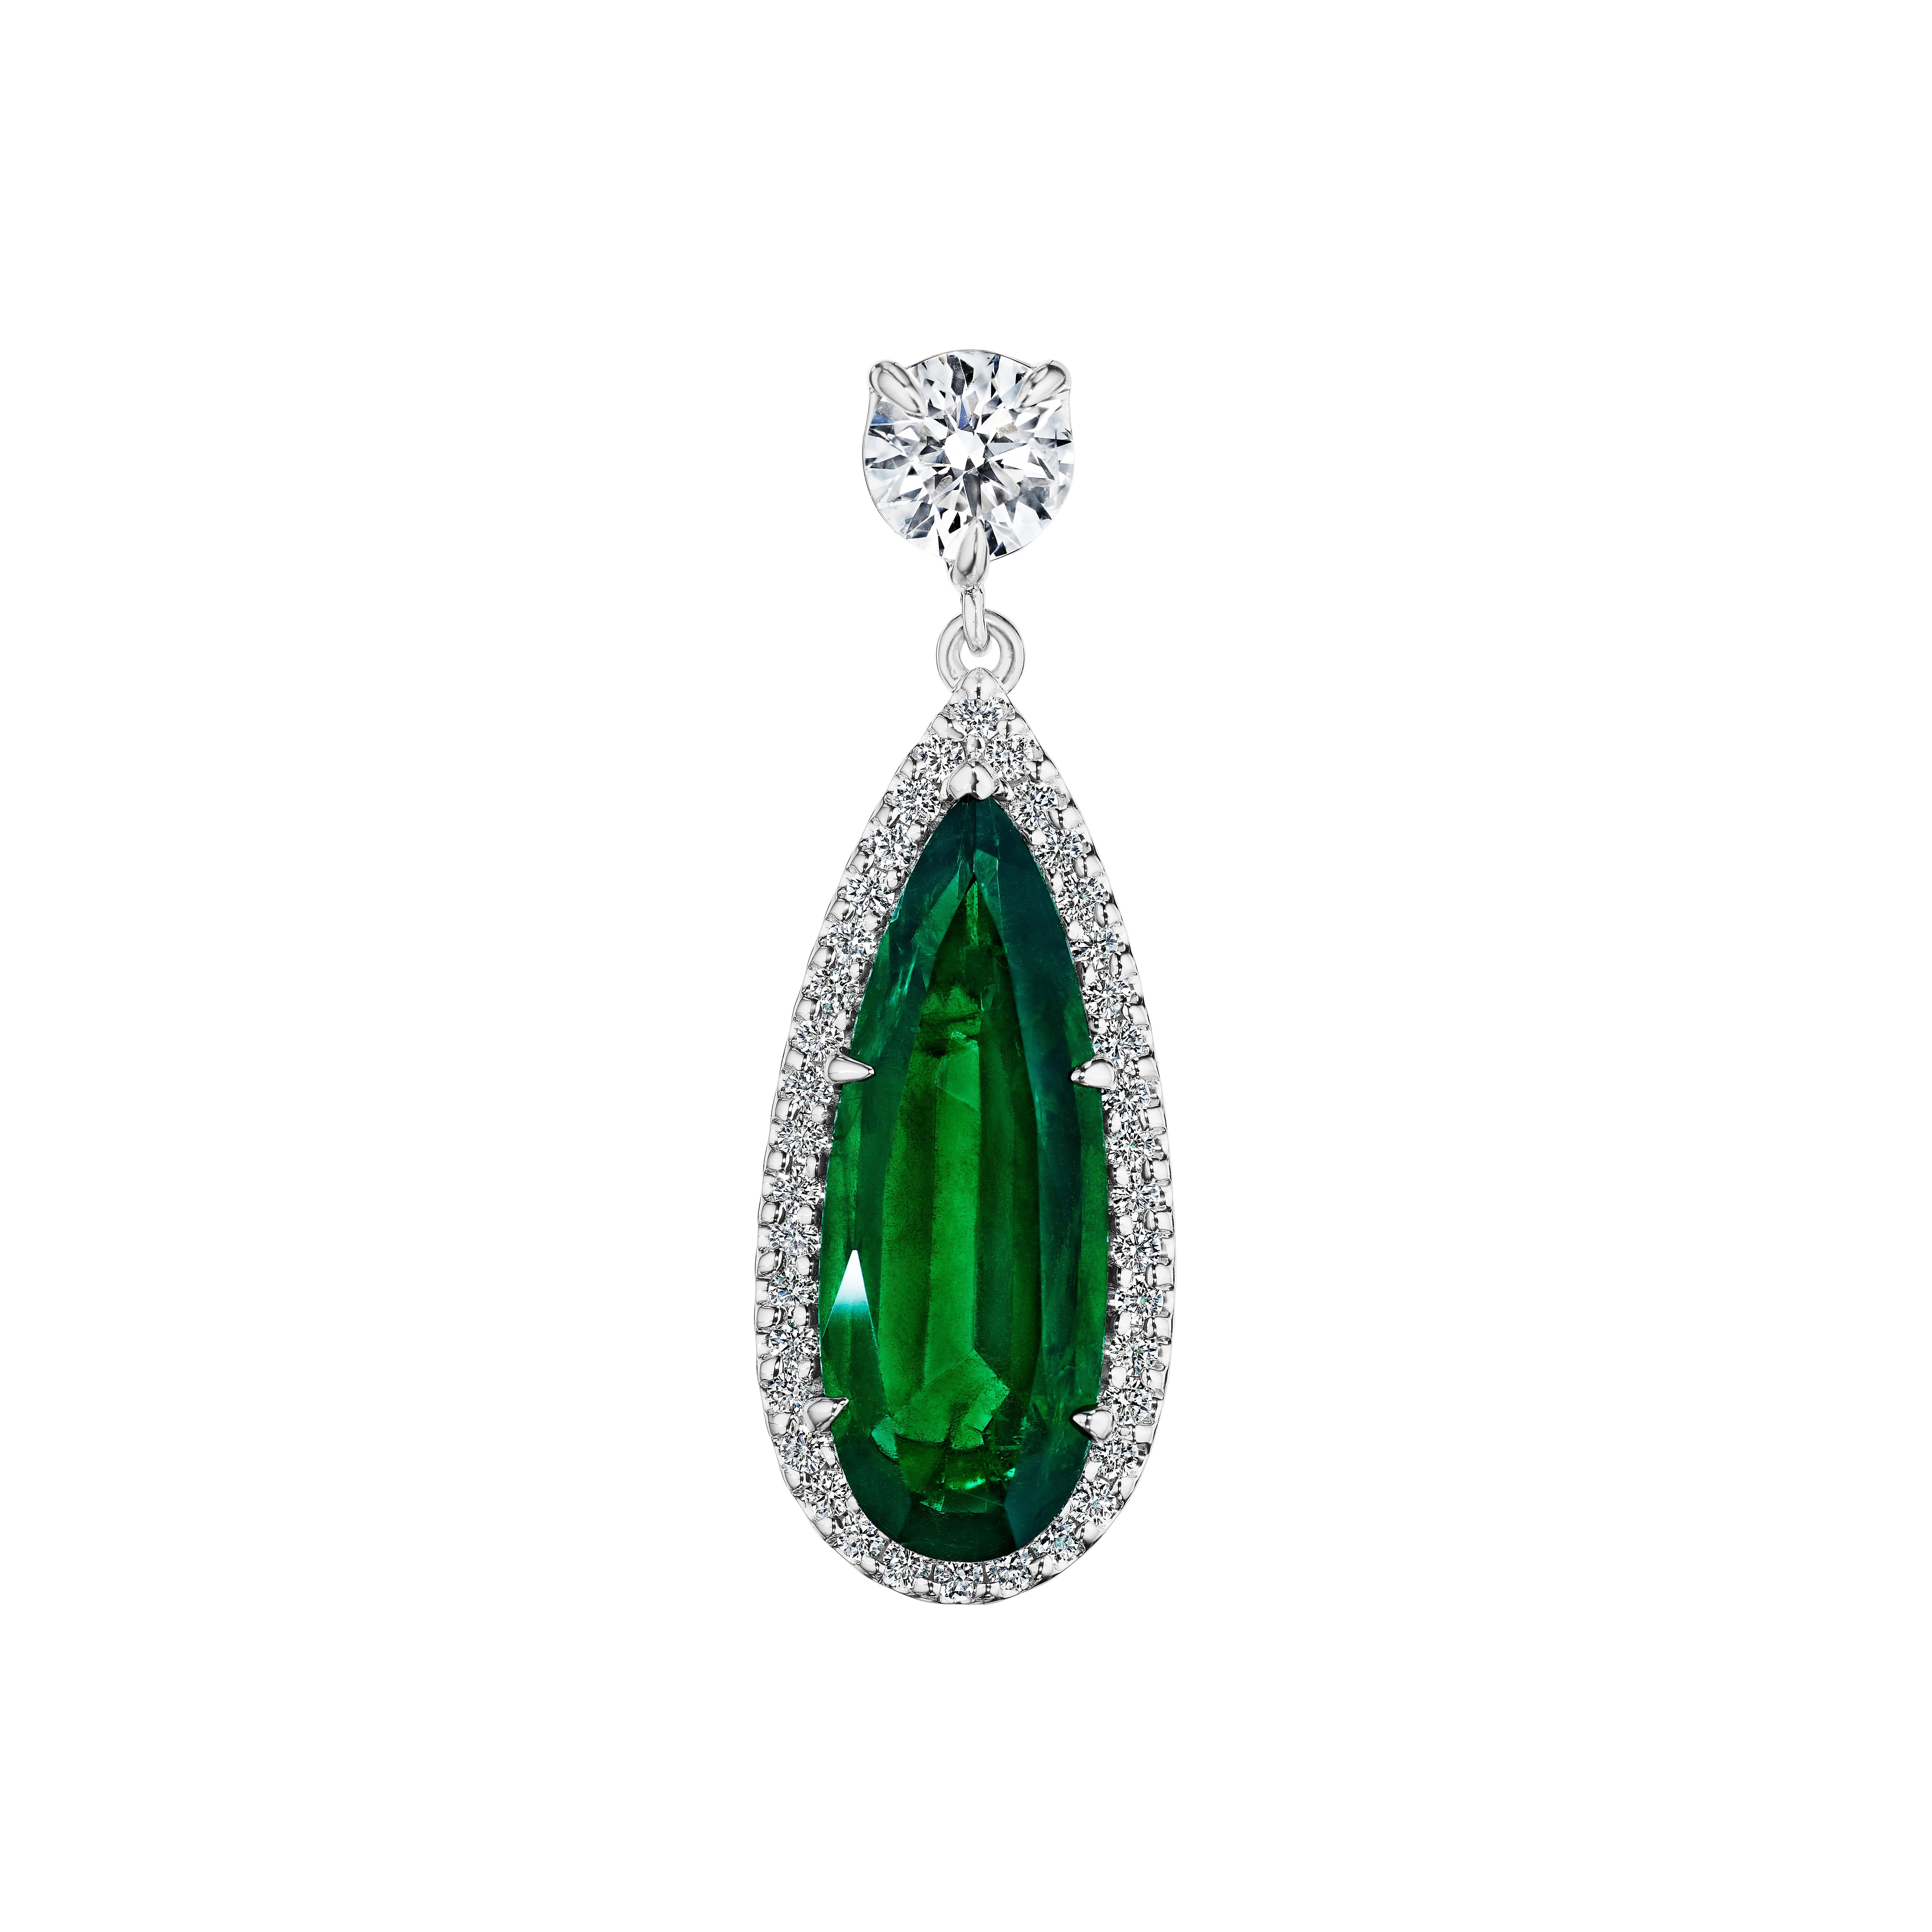 •	12.87 Carats
•	18KT White Gold
•	Earrings are sold as a pair (2 earrings in total)

•	Number of Pear Shape Emeralds: 2
•	Carat Weight: 10.68ctw

•	Number of Round Diamonds: 2
•	Carat Weight: 1.45ctw

•	Number of Round Diamonds: 76
•	Carat Weight: